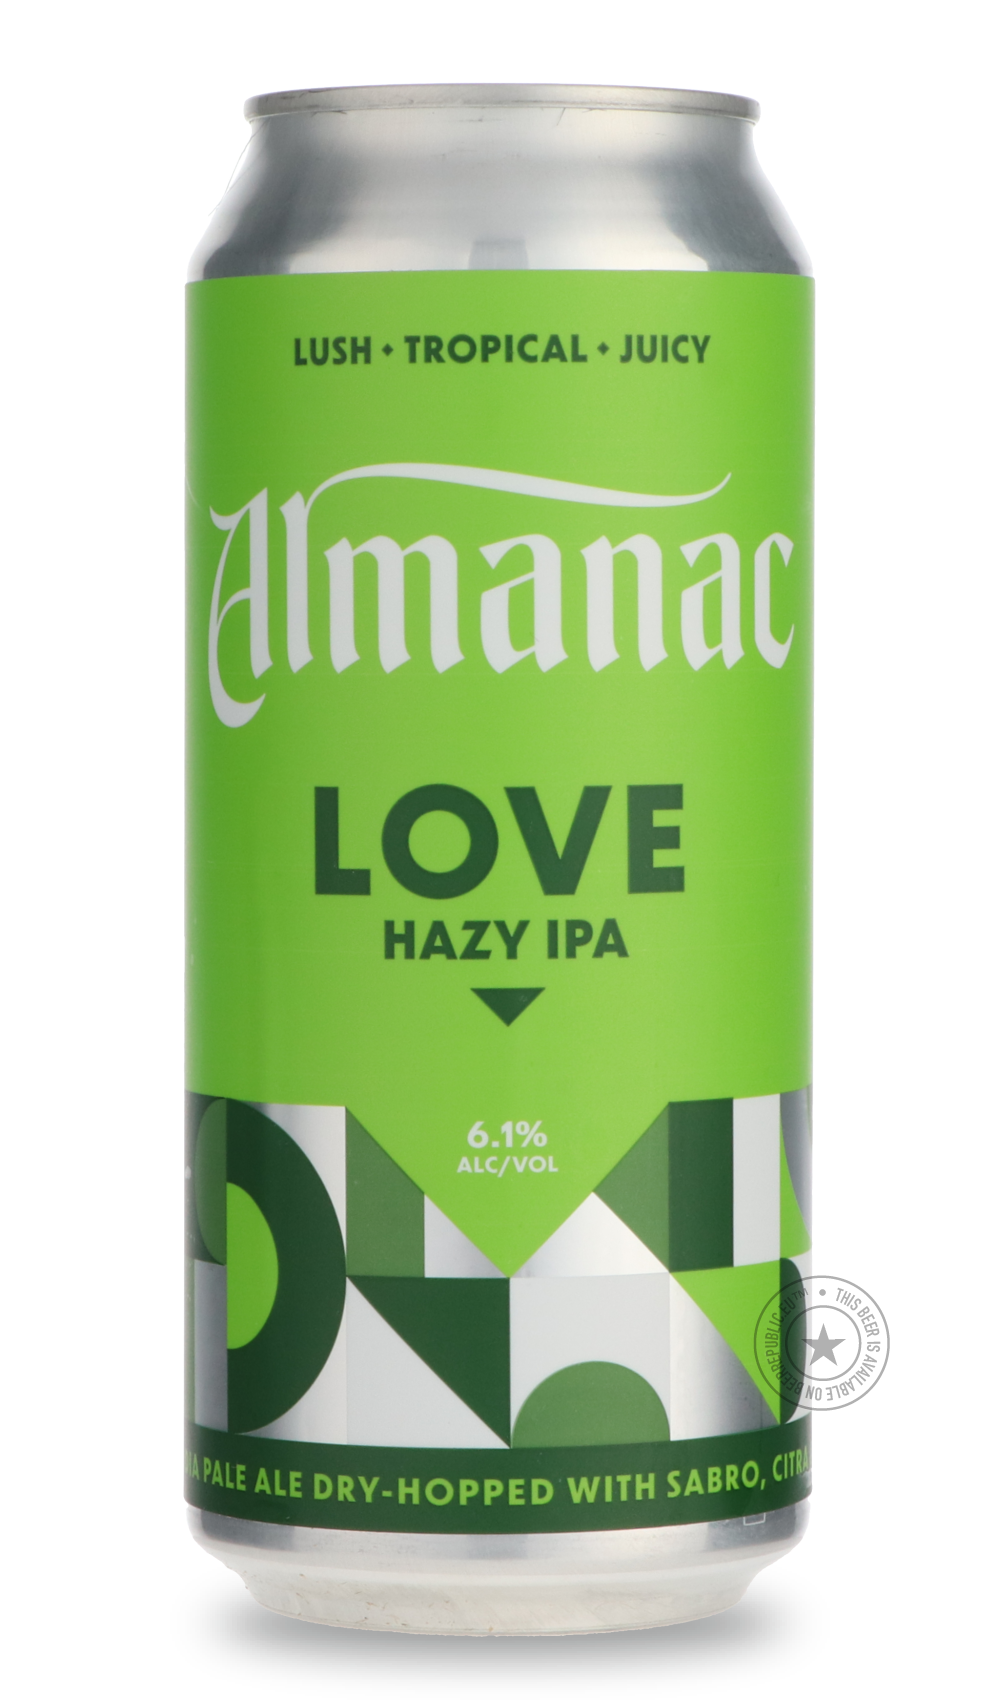 -Almanac- Love-IPA- Only @ Beer Republic - The best online beer store for American & Canadian craft beer - Buy beer online from the USA and Canada - Bier online kopen - Amerikaans bier kopen - Craft beer store - Craft beer kopen - Amerikanisch bier kaufen - Bier online kaufen - Acheter biere online - IPA - Stout - Porter - New England IPA - Hazy IPA - Imperial Stout - Barrel Aged - Barrel Aged Imperial Stout - Brown - Dark beer - Blond - Blonde - Pilsner - Lager - Wheat - Weizen - Amber - Barley Wine - Quad